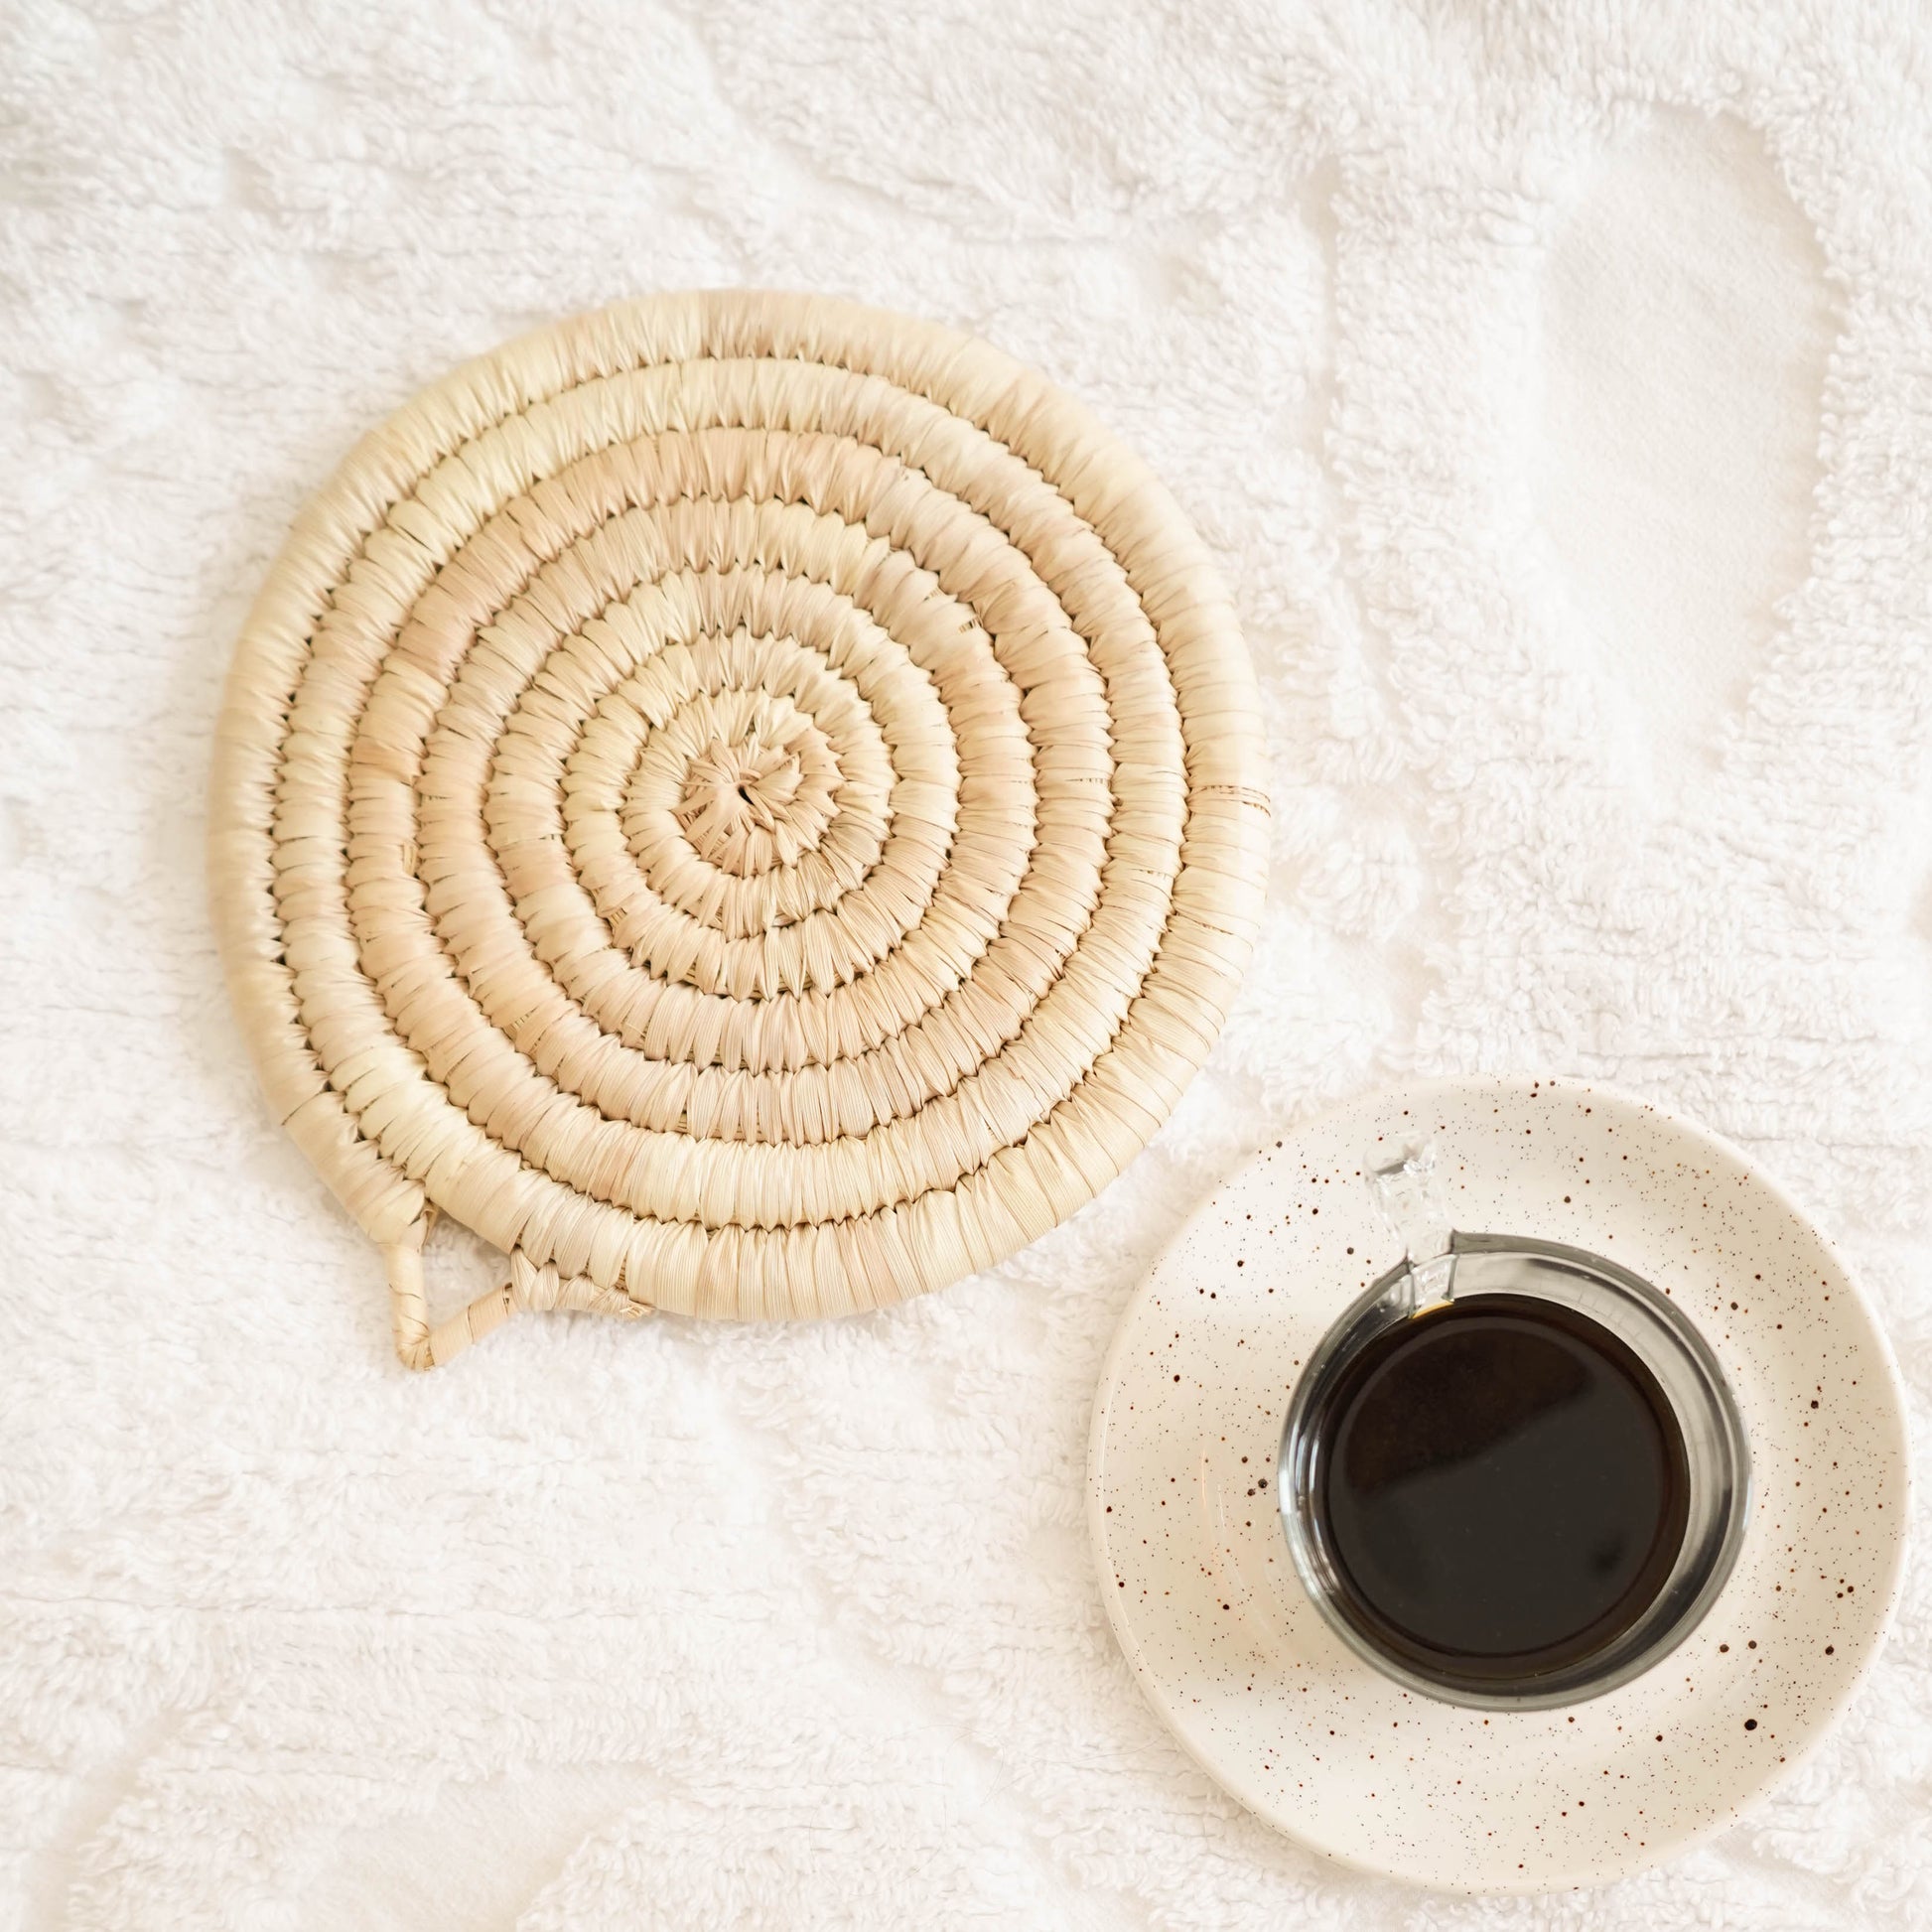 Straw trivet on top of a white table linen